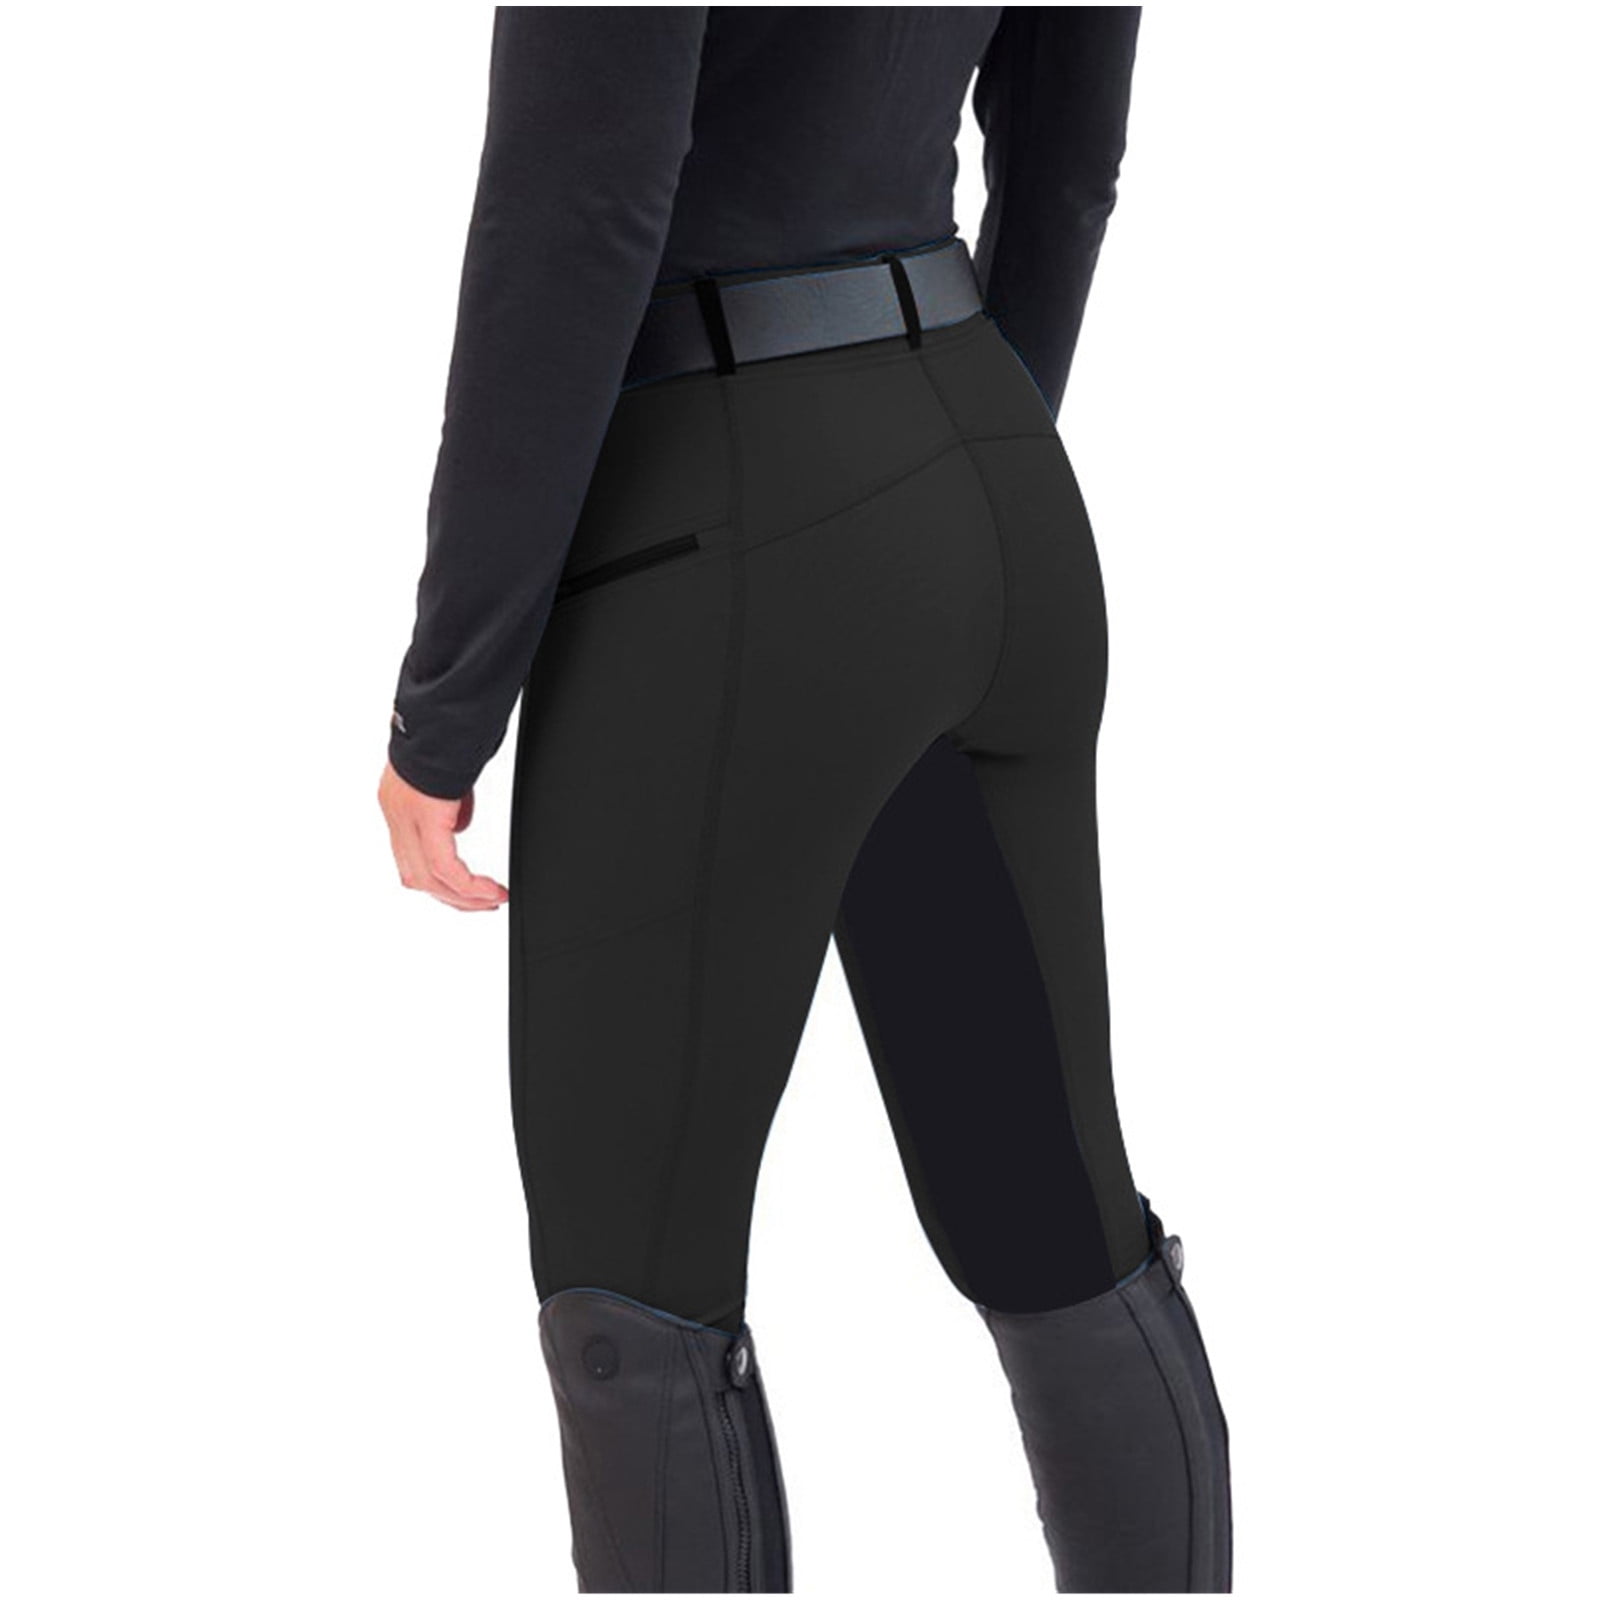 Women/'s Breeches for Horseback Equestrian Tights Yoga Pants Activewear Fitted Exercise Sports Riding Pants for Women